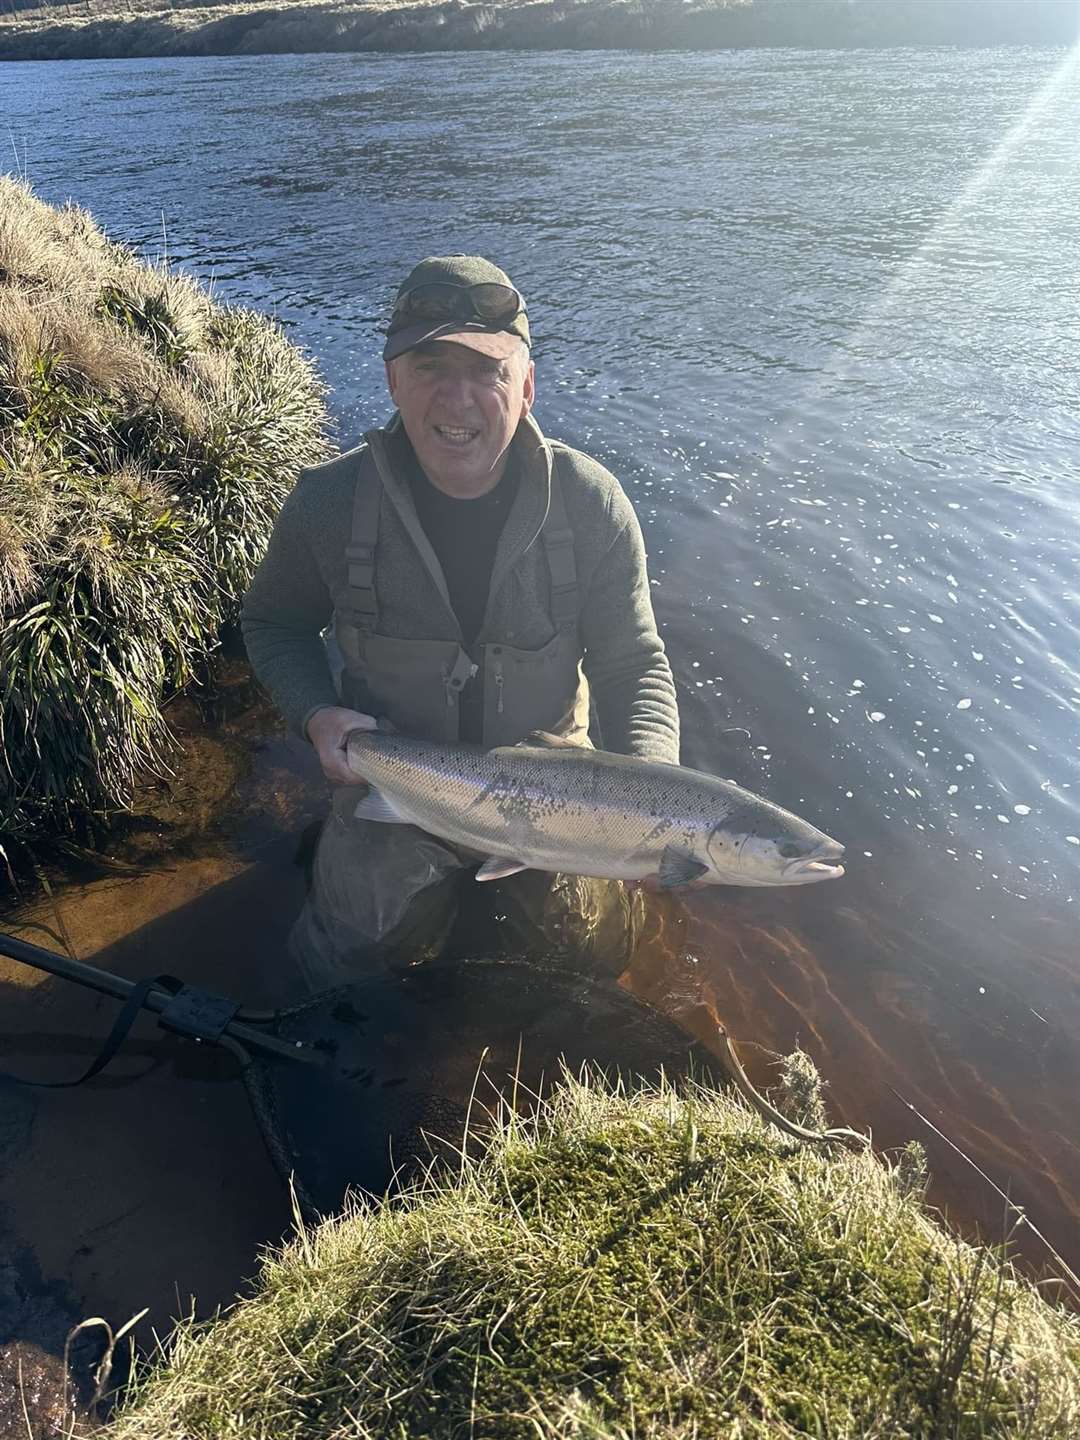 Mr Sutherland hooked a 12lb salmon today from the Salscraggie Boils pool using a 1” Willie Gunn fly given to him by his brother Ronald Sutherland.